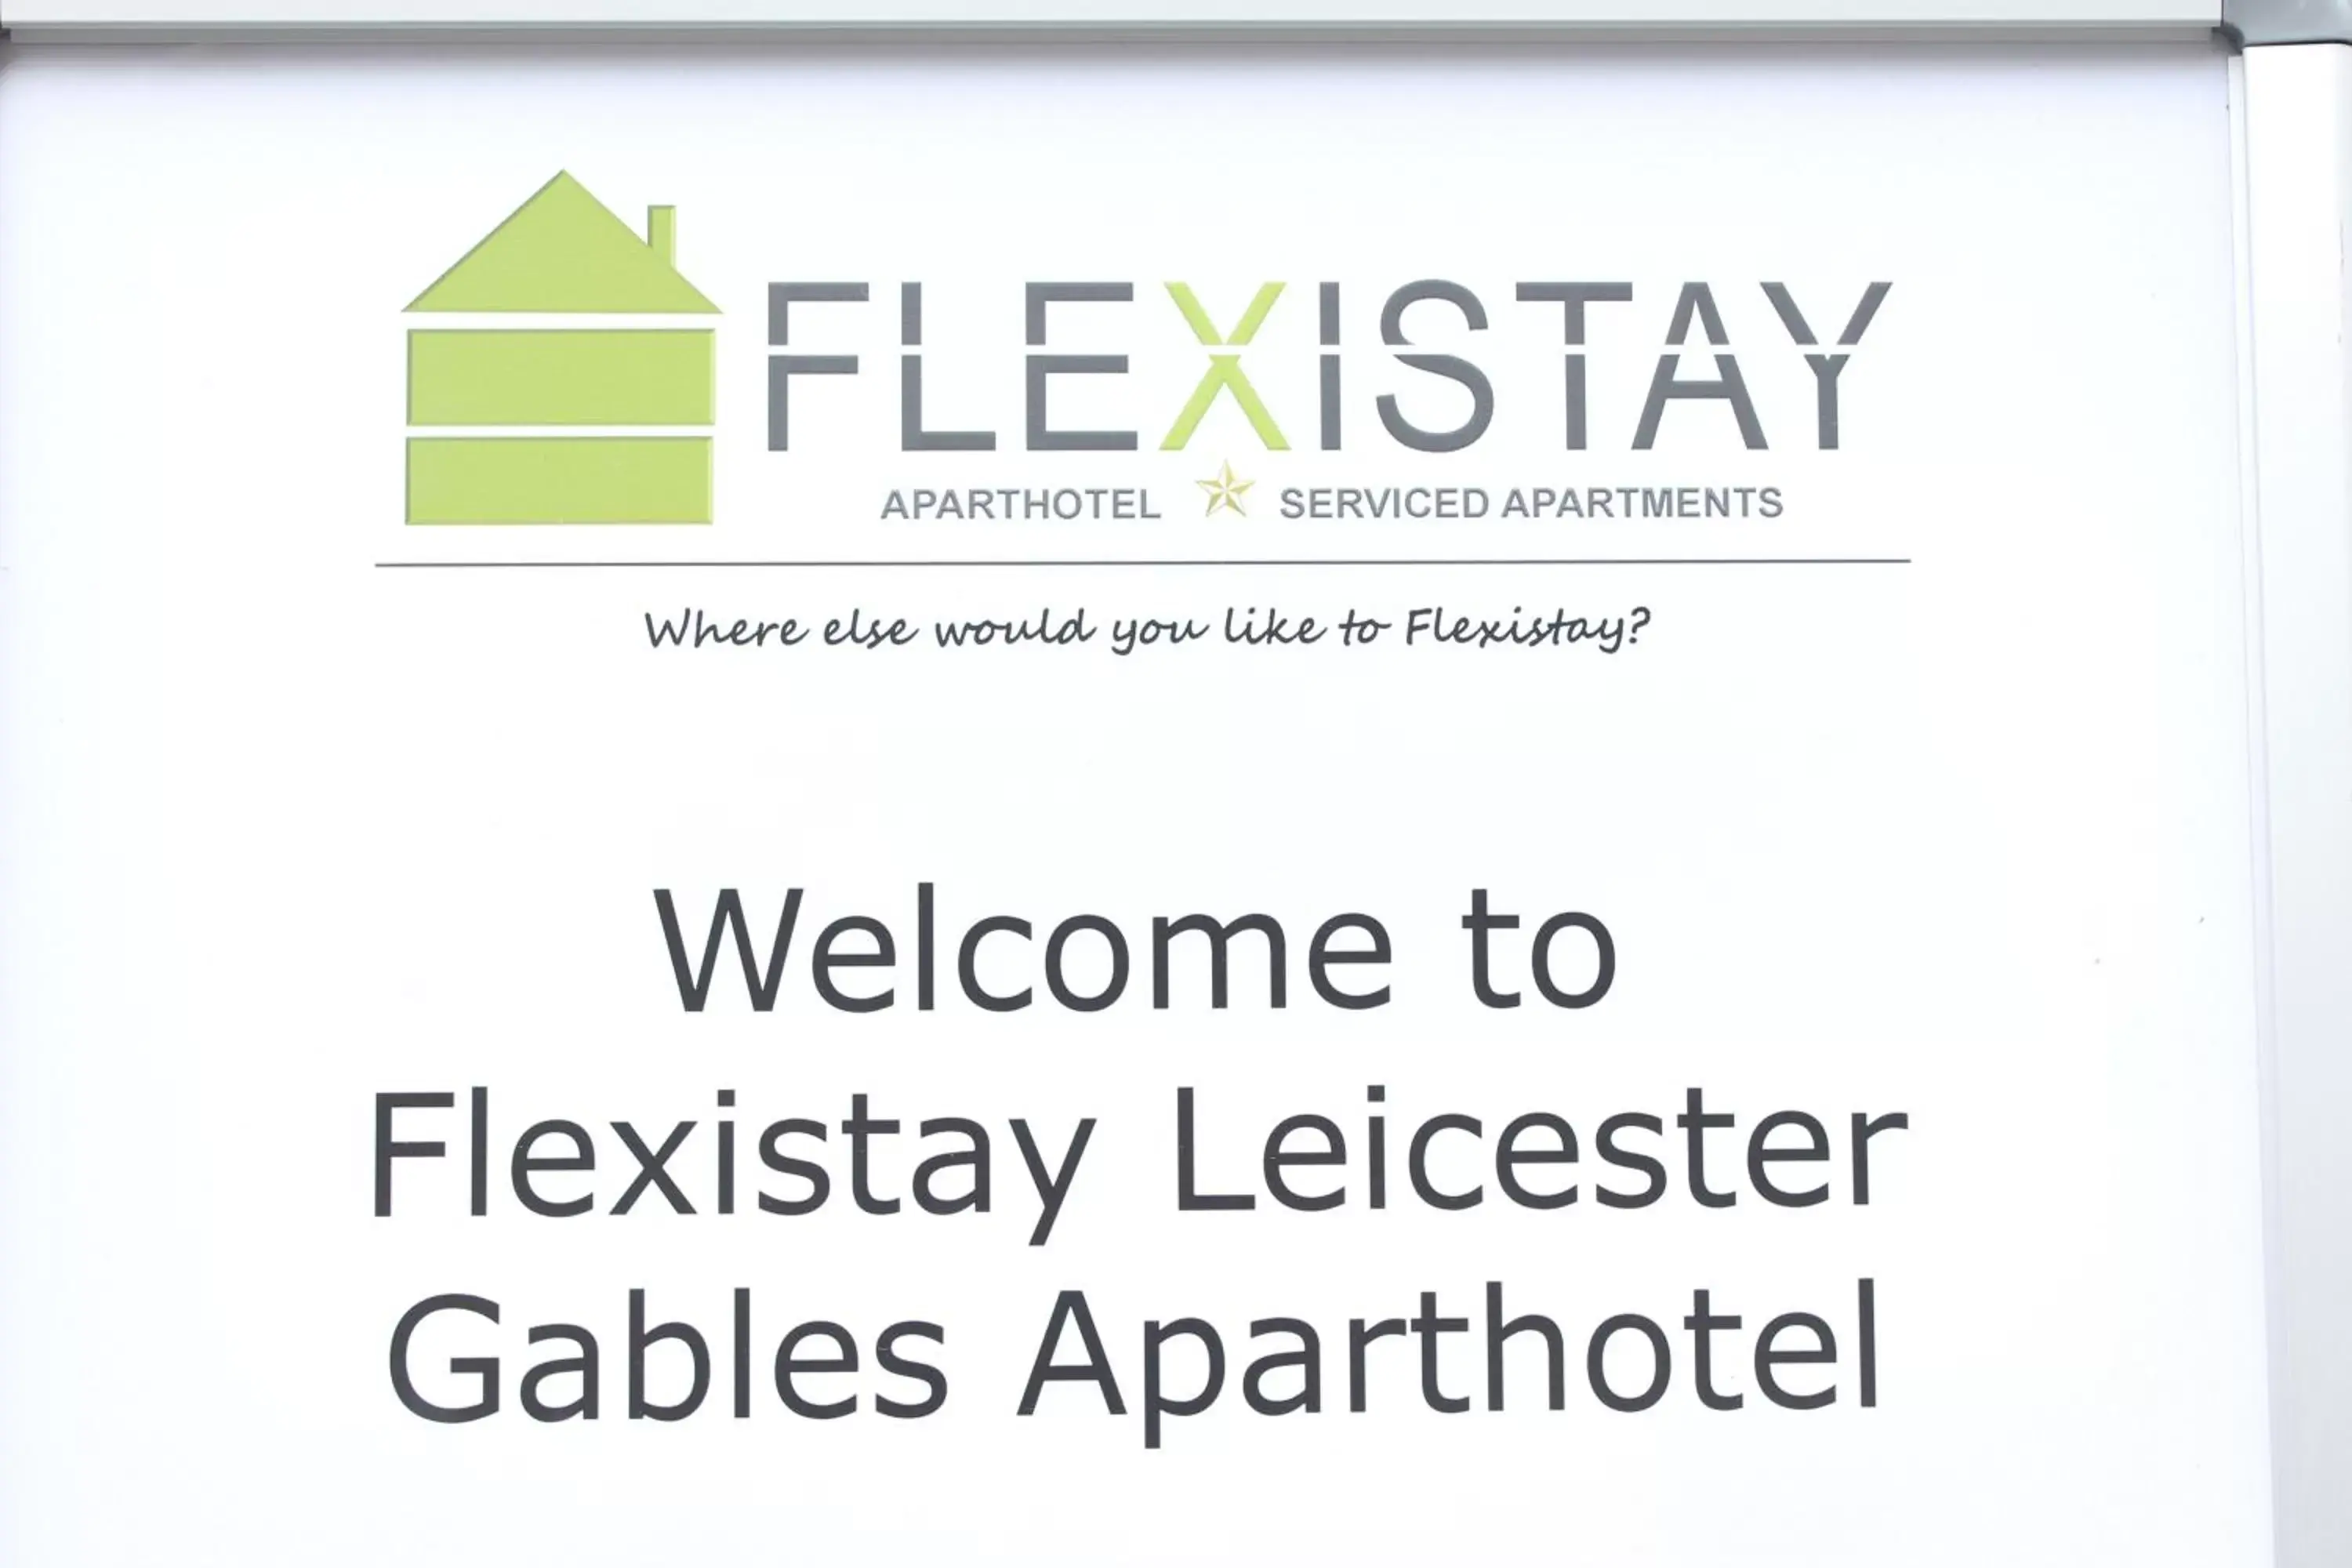 Other in Flexistay Leicester Gable Aparthotel